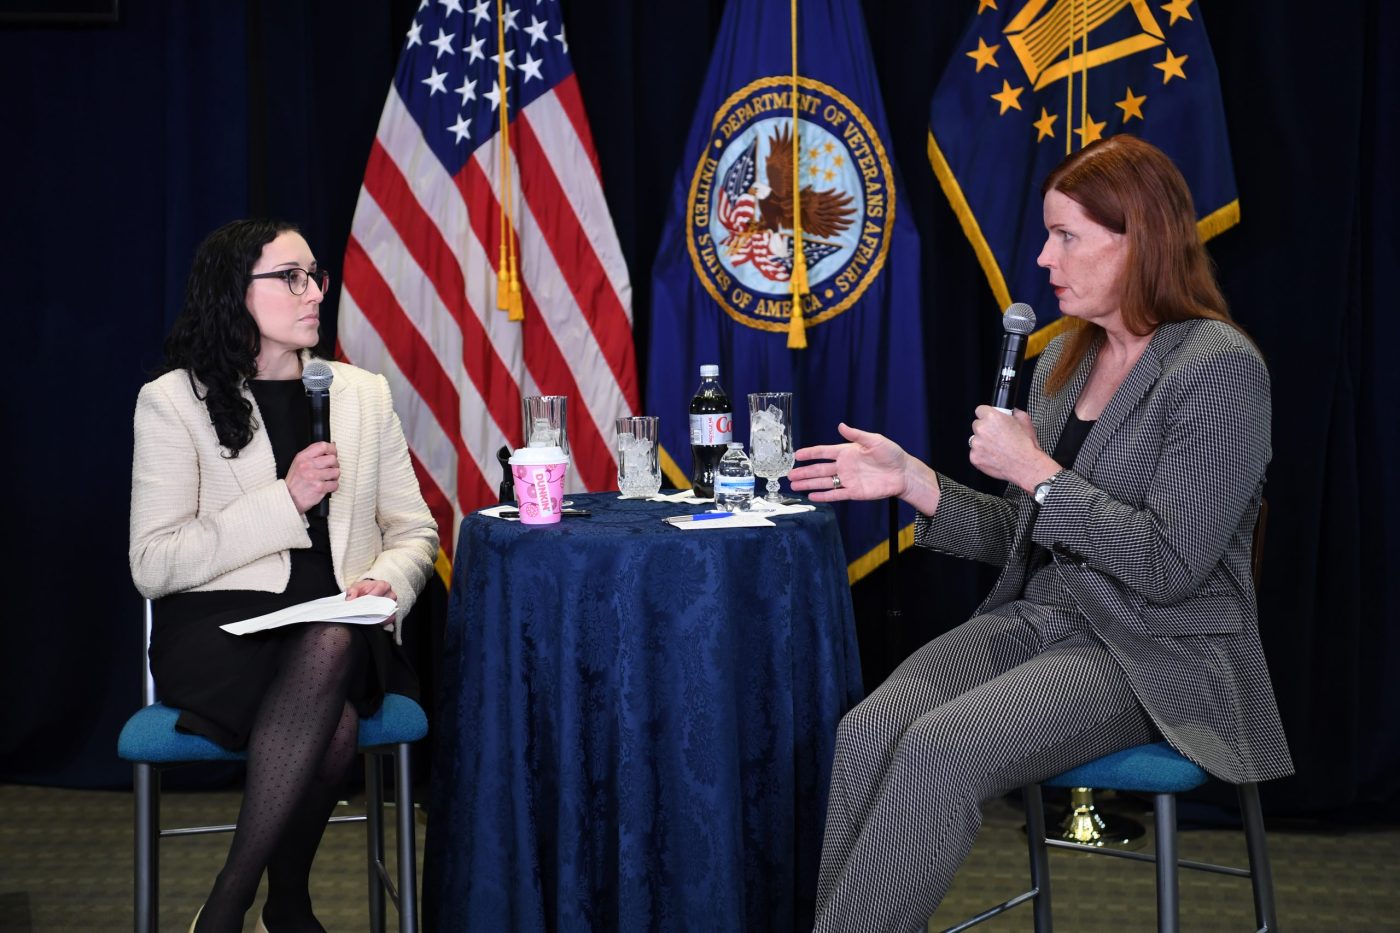 VA’s Center for Minority Veterans recently hosted a fireside chat for Transgender Day of Remembrance, showcasing its commitment to inclusivity and diversity, and as a platform to discuss the challenges and triumphs of transgender Veterans.